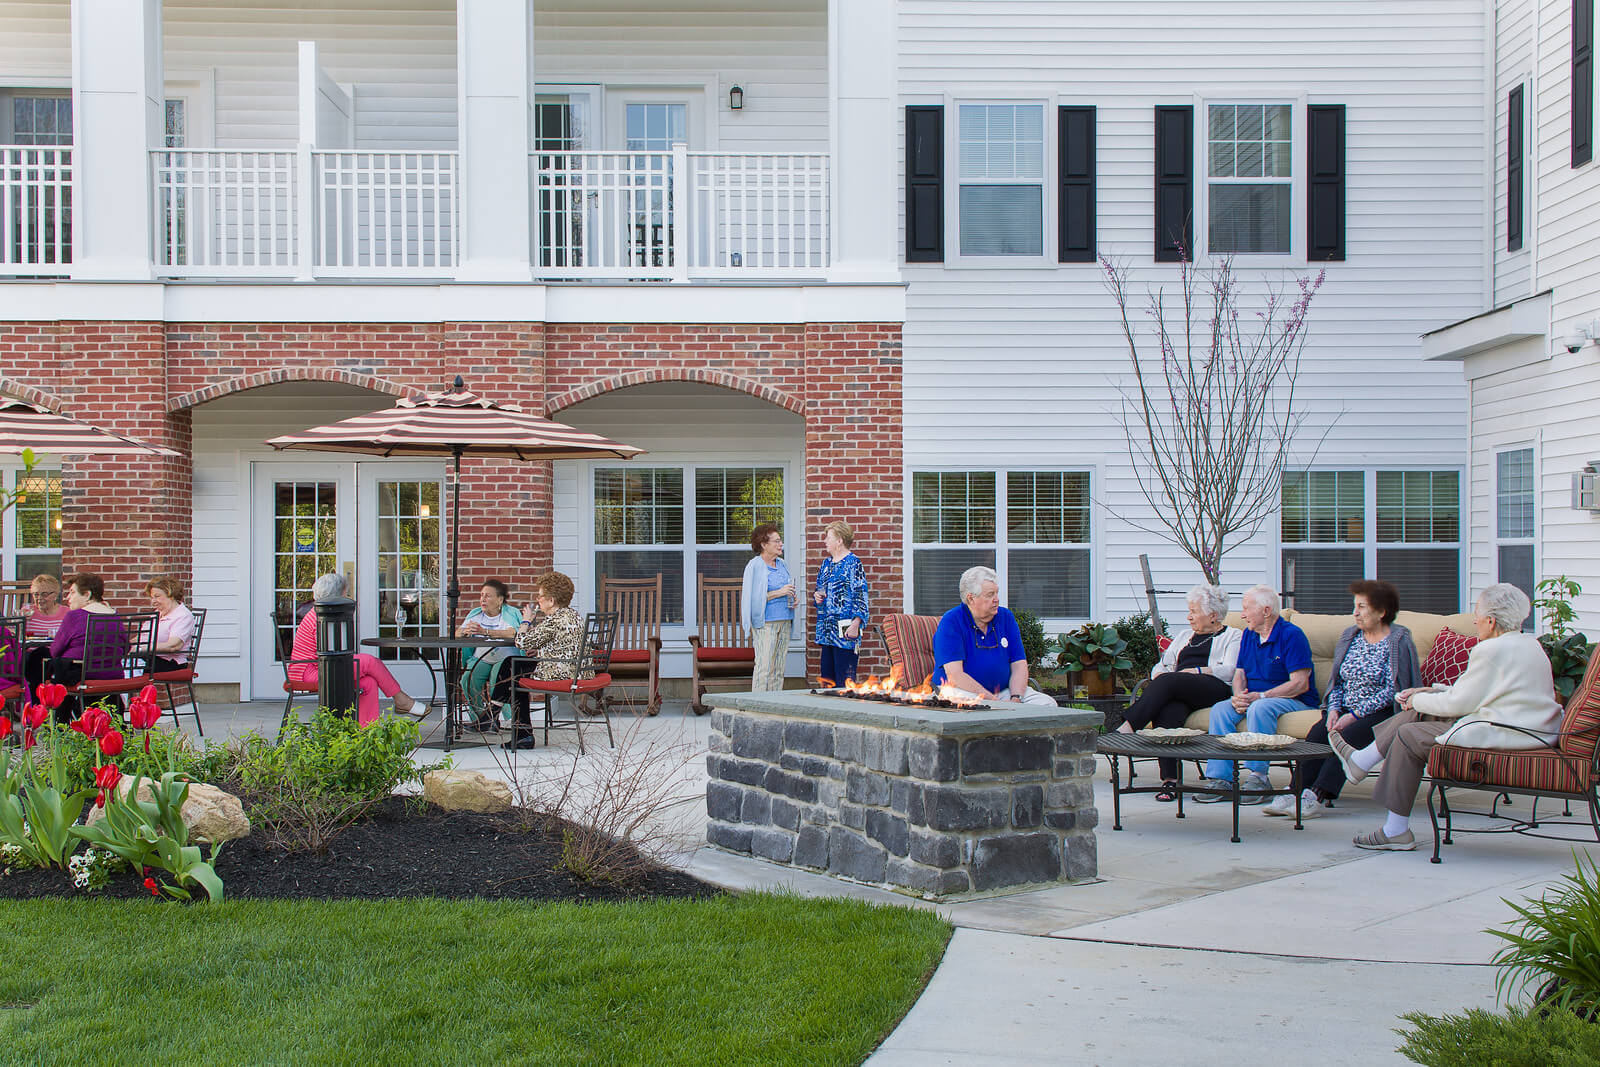 Outside view of a courtyard at a senior living facility. Several seniors are gathered in the courtyard at various picnic tables and lounge seating, socializing with one another.